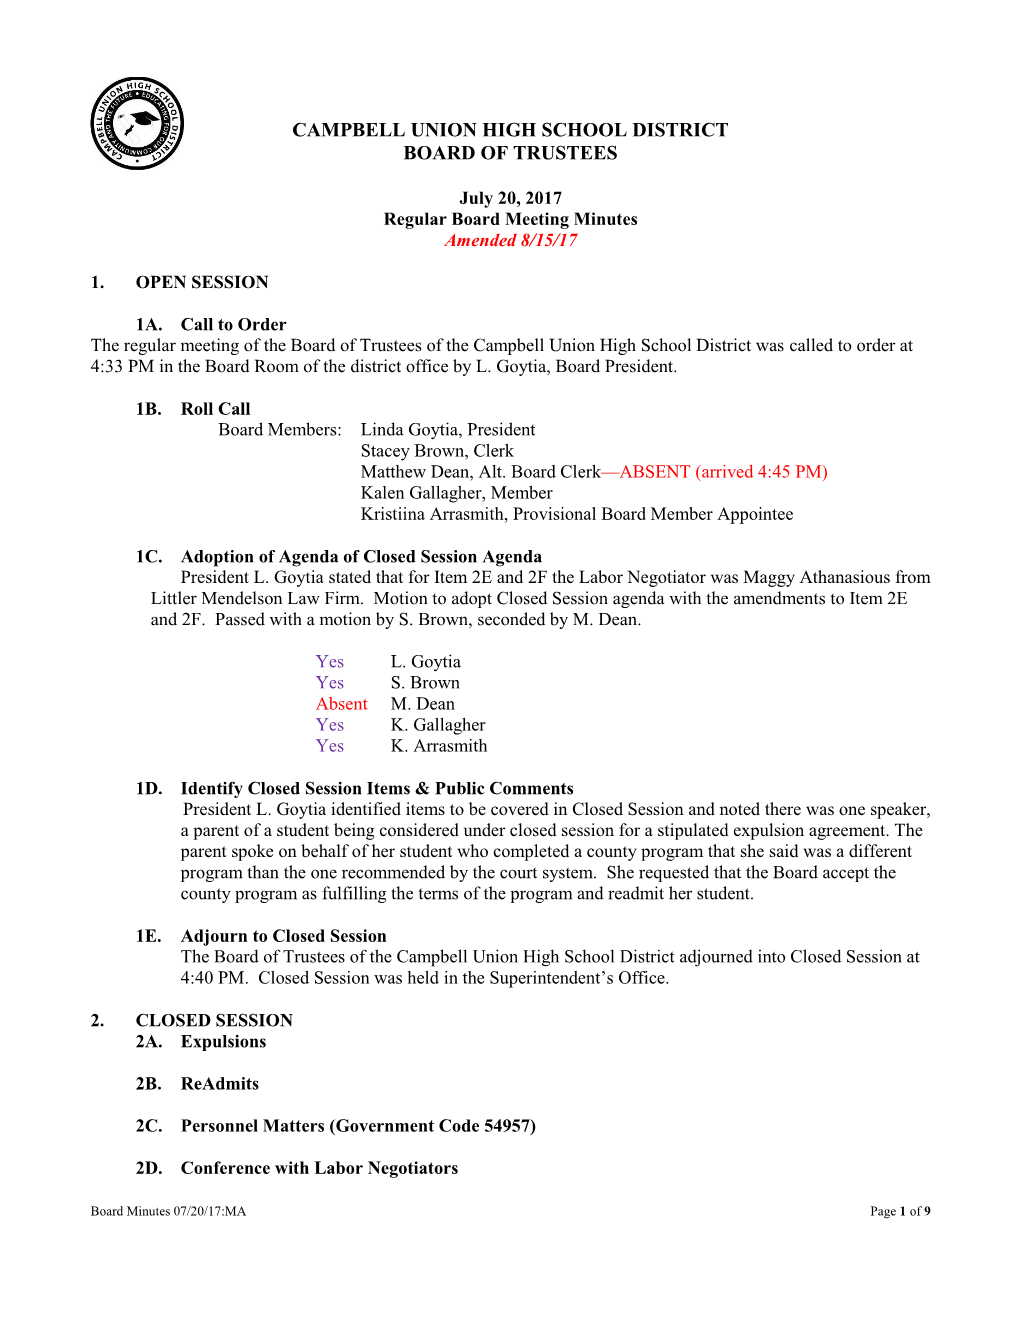 July 20, 2017 Regular Board Meeting Minutes Amended 8/15/17